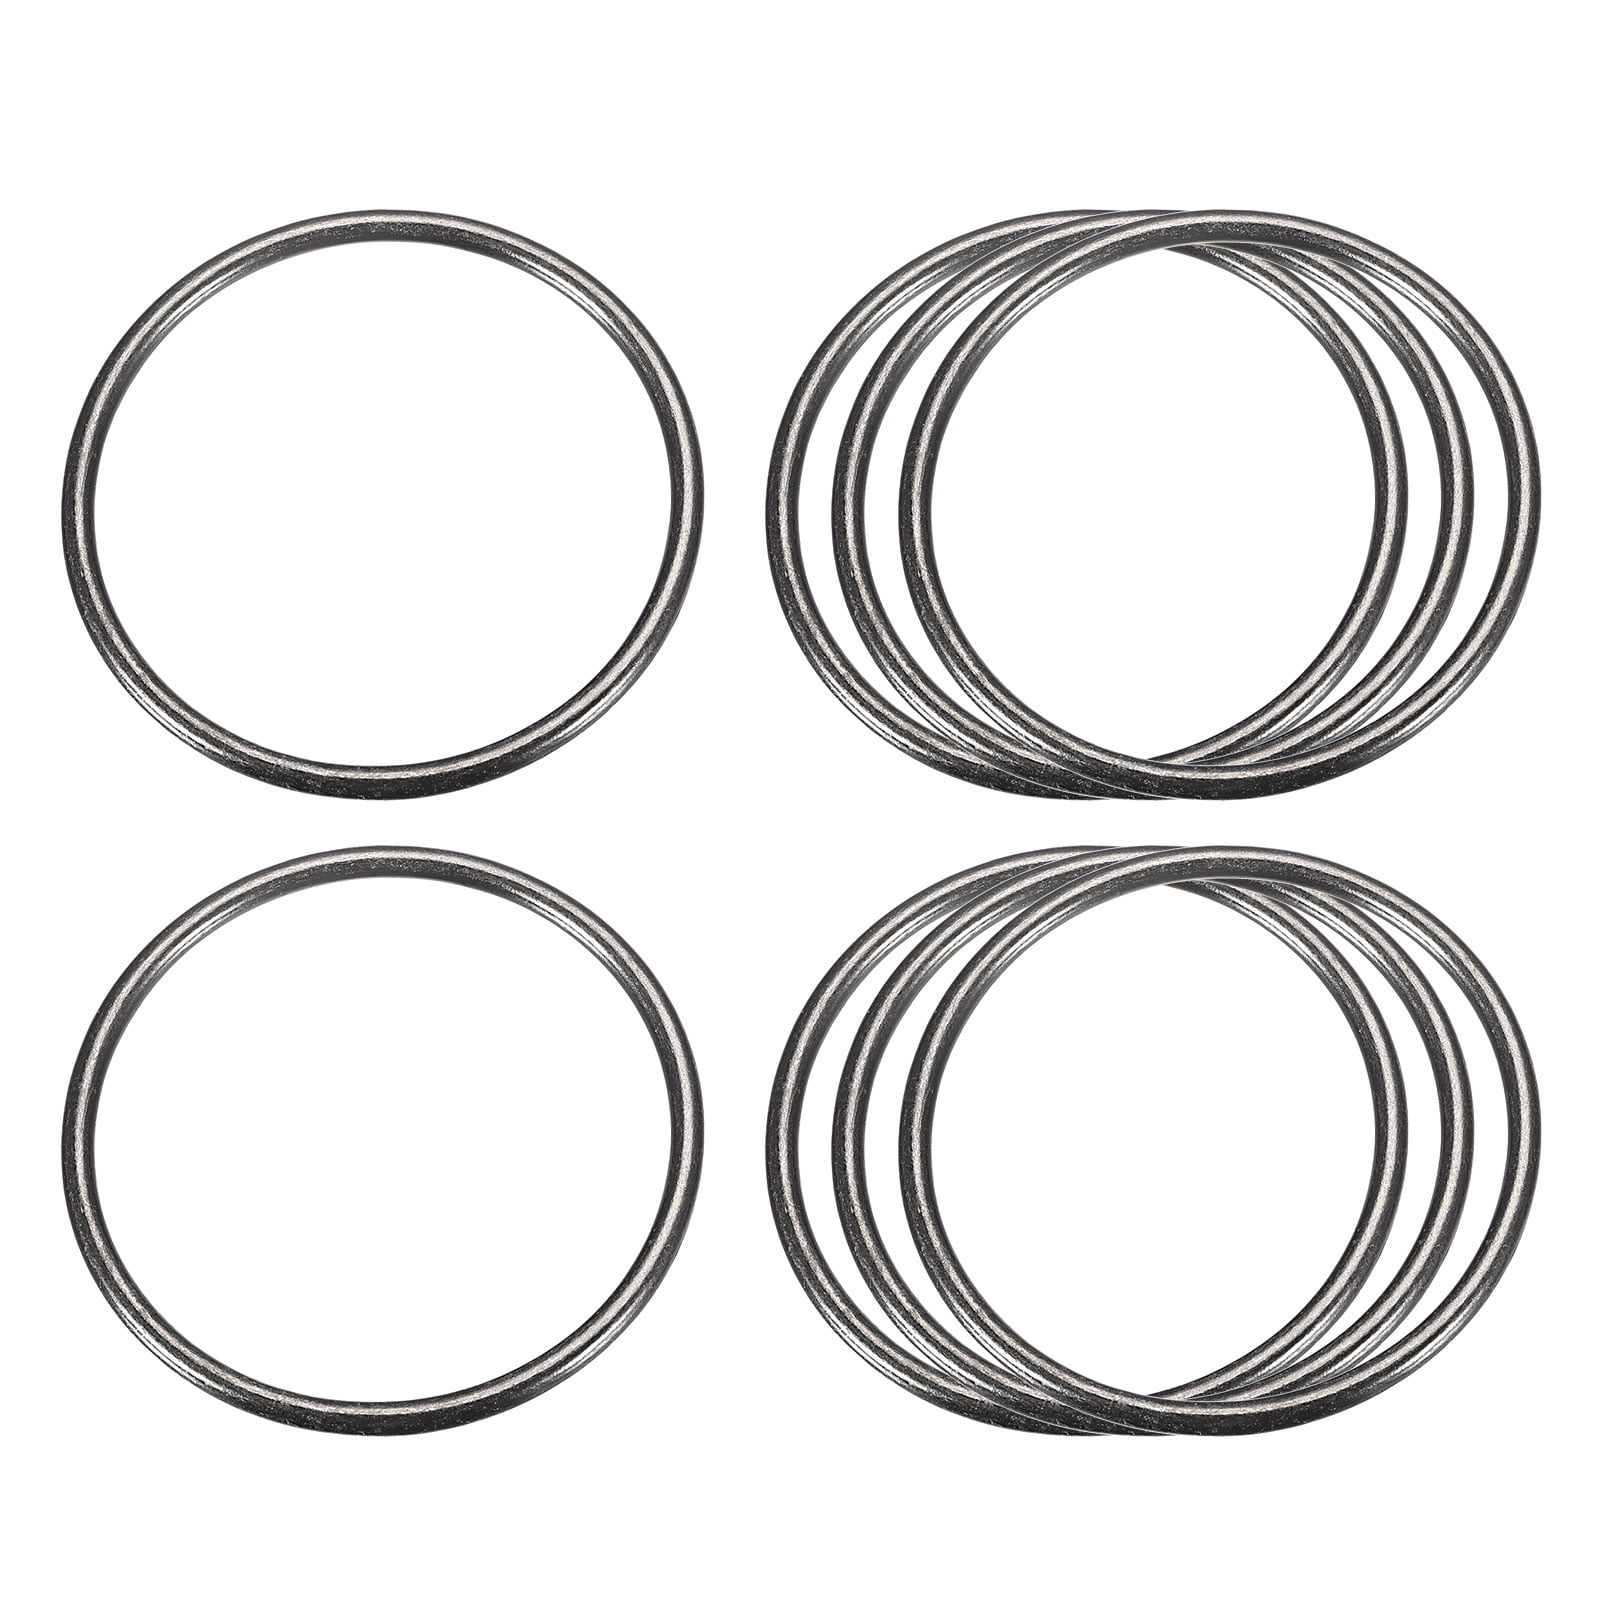 Amazon.com: 12 Pcs Silver Multi-Purpose Metal O Ring Non-Welded O Ring for  DIY Accessories Hardware Bags Ring,Dream Catcher and Crafts,2 inch/50mm